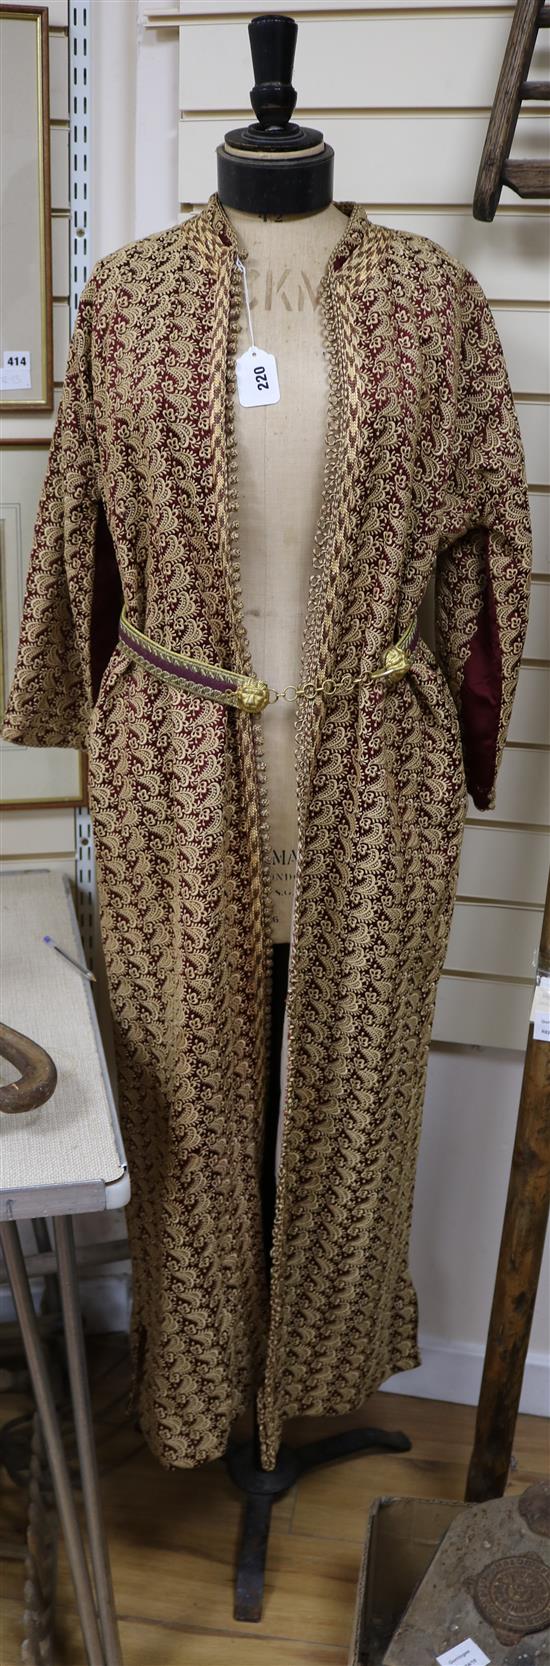 An Indian embroidered coat